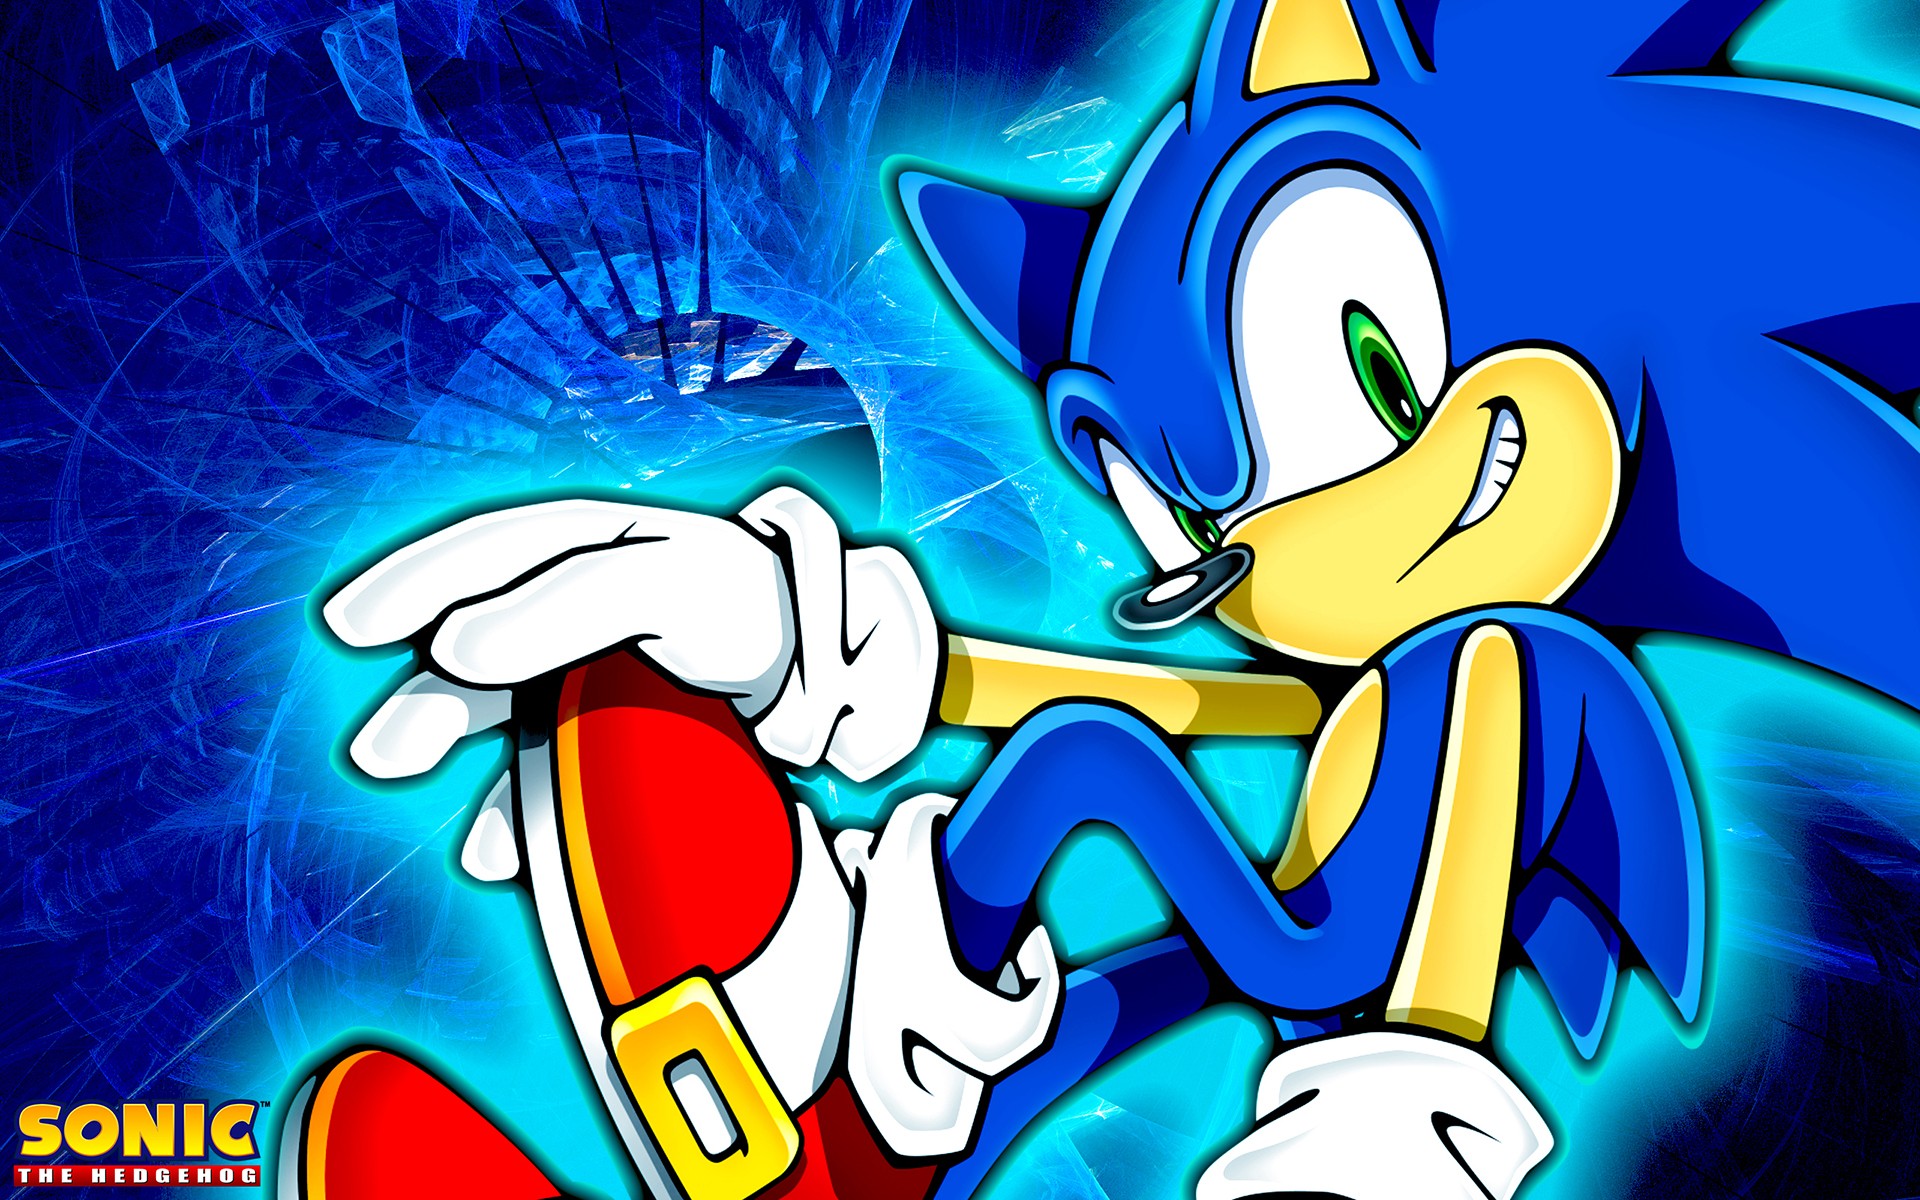 sonic the hedgehog wallpaper hd,animated cartoon,cartoon,sonic the hedgehog,fictional character,graphic design